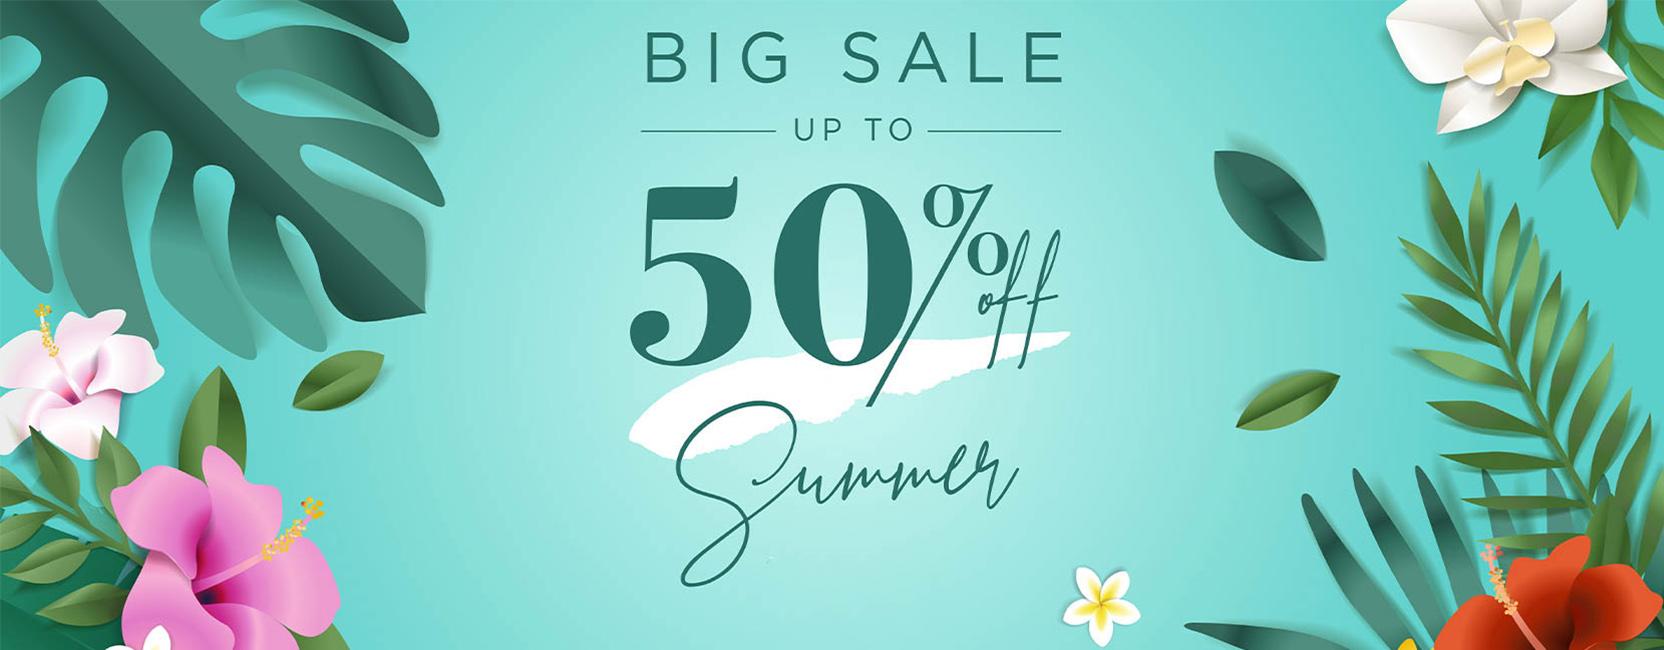 Big Sale up to 50% Summer